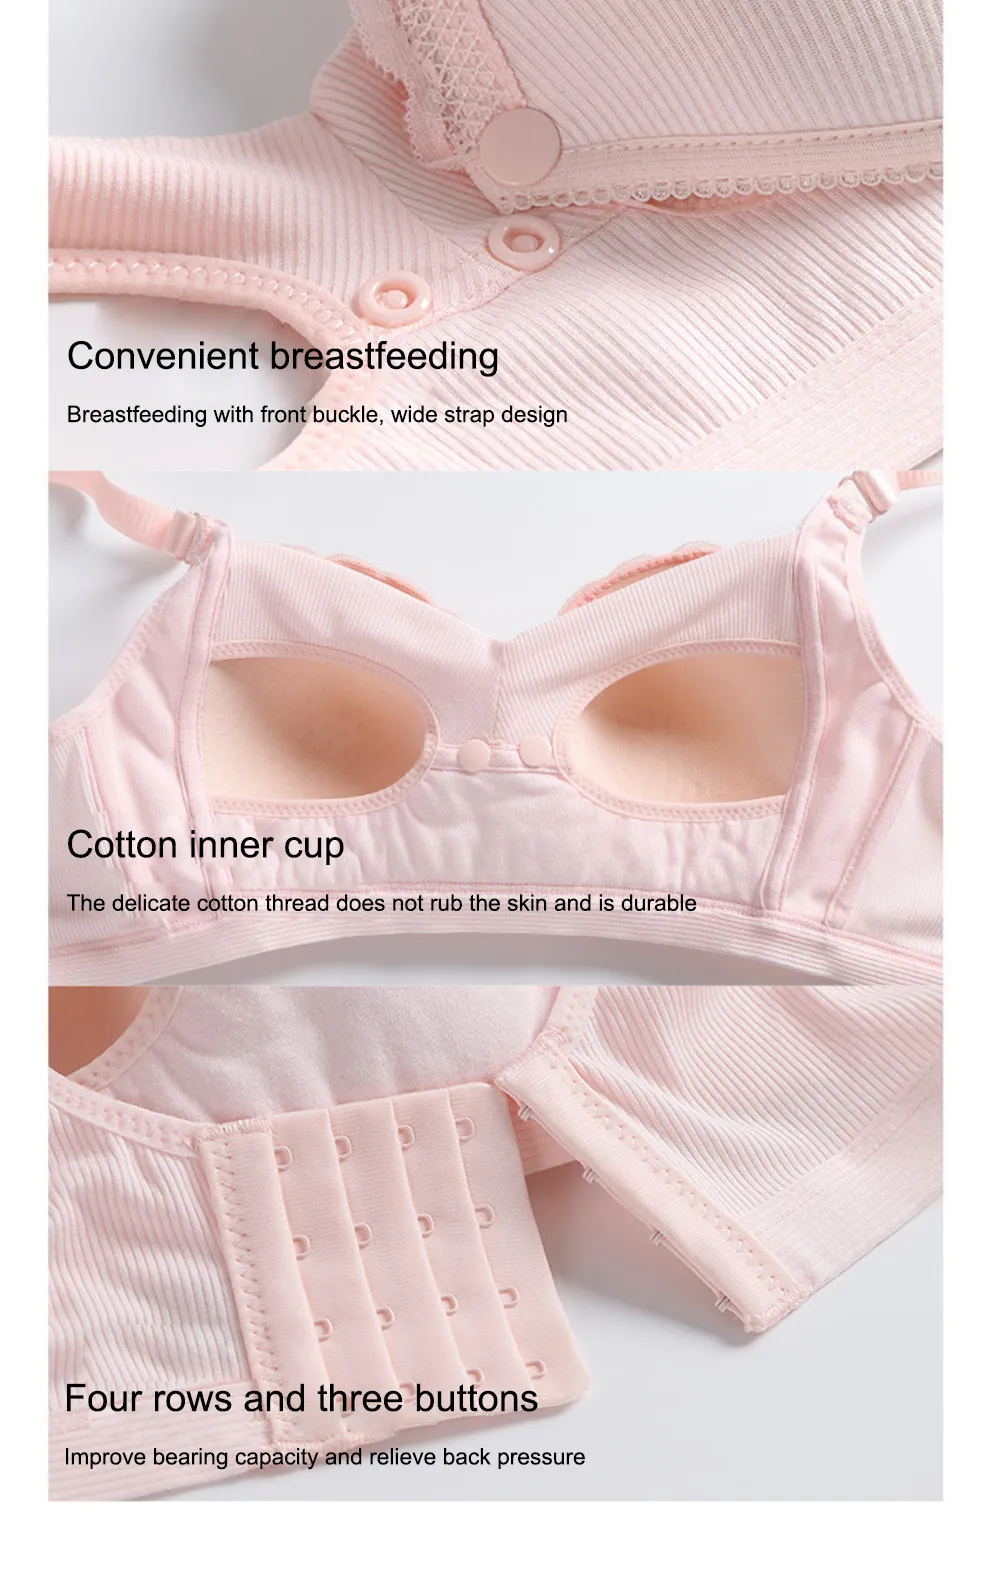 Maternity Nursing Bra Open And Comfortable Bra Underwear For Breastfeeding,  Pregnancy, And Intimate Moments LJ201125 From Jiao08, $13.18